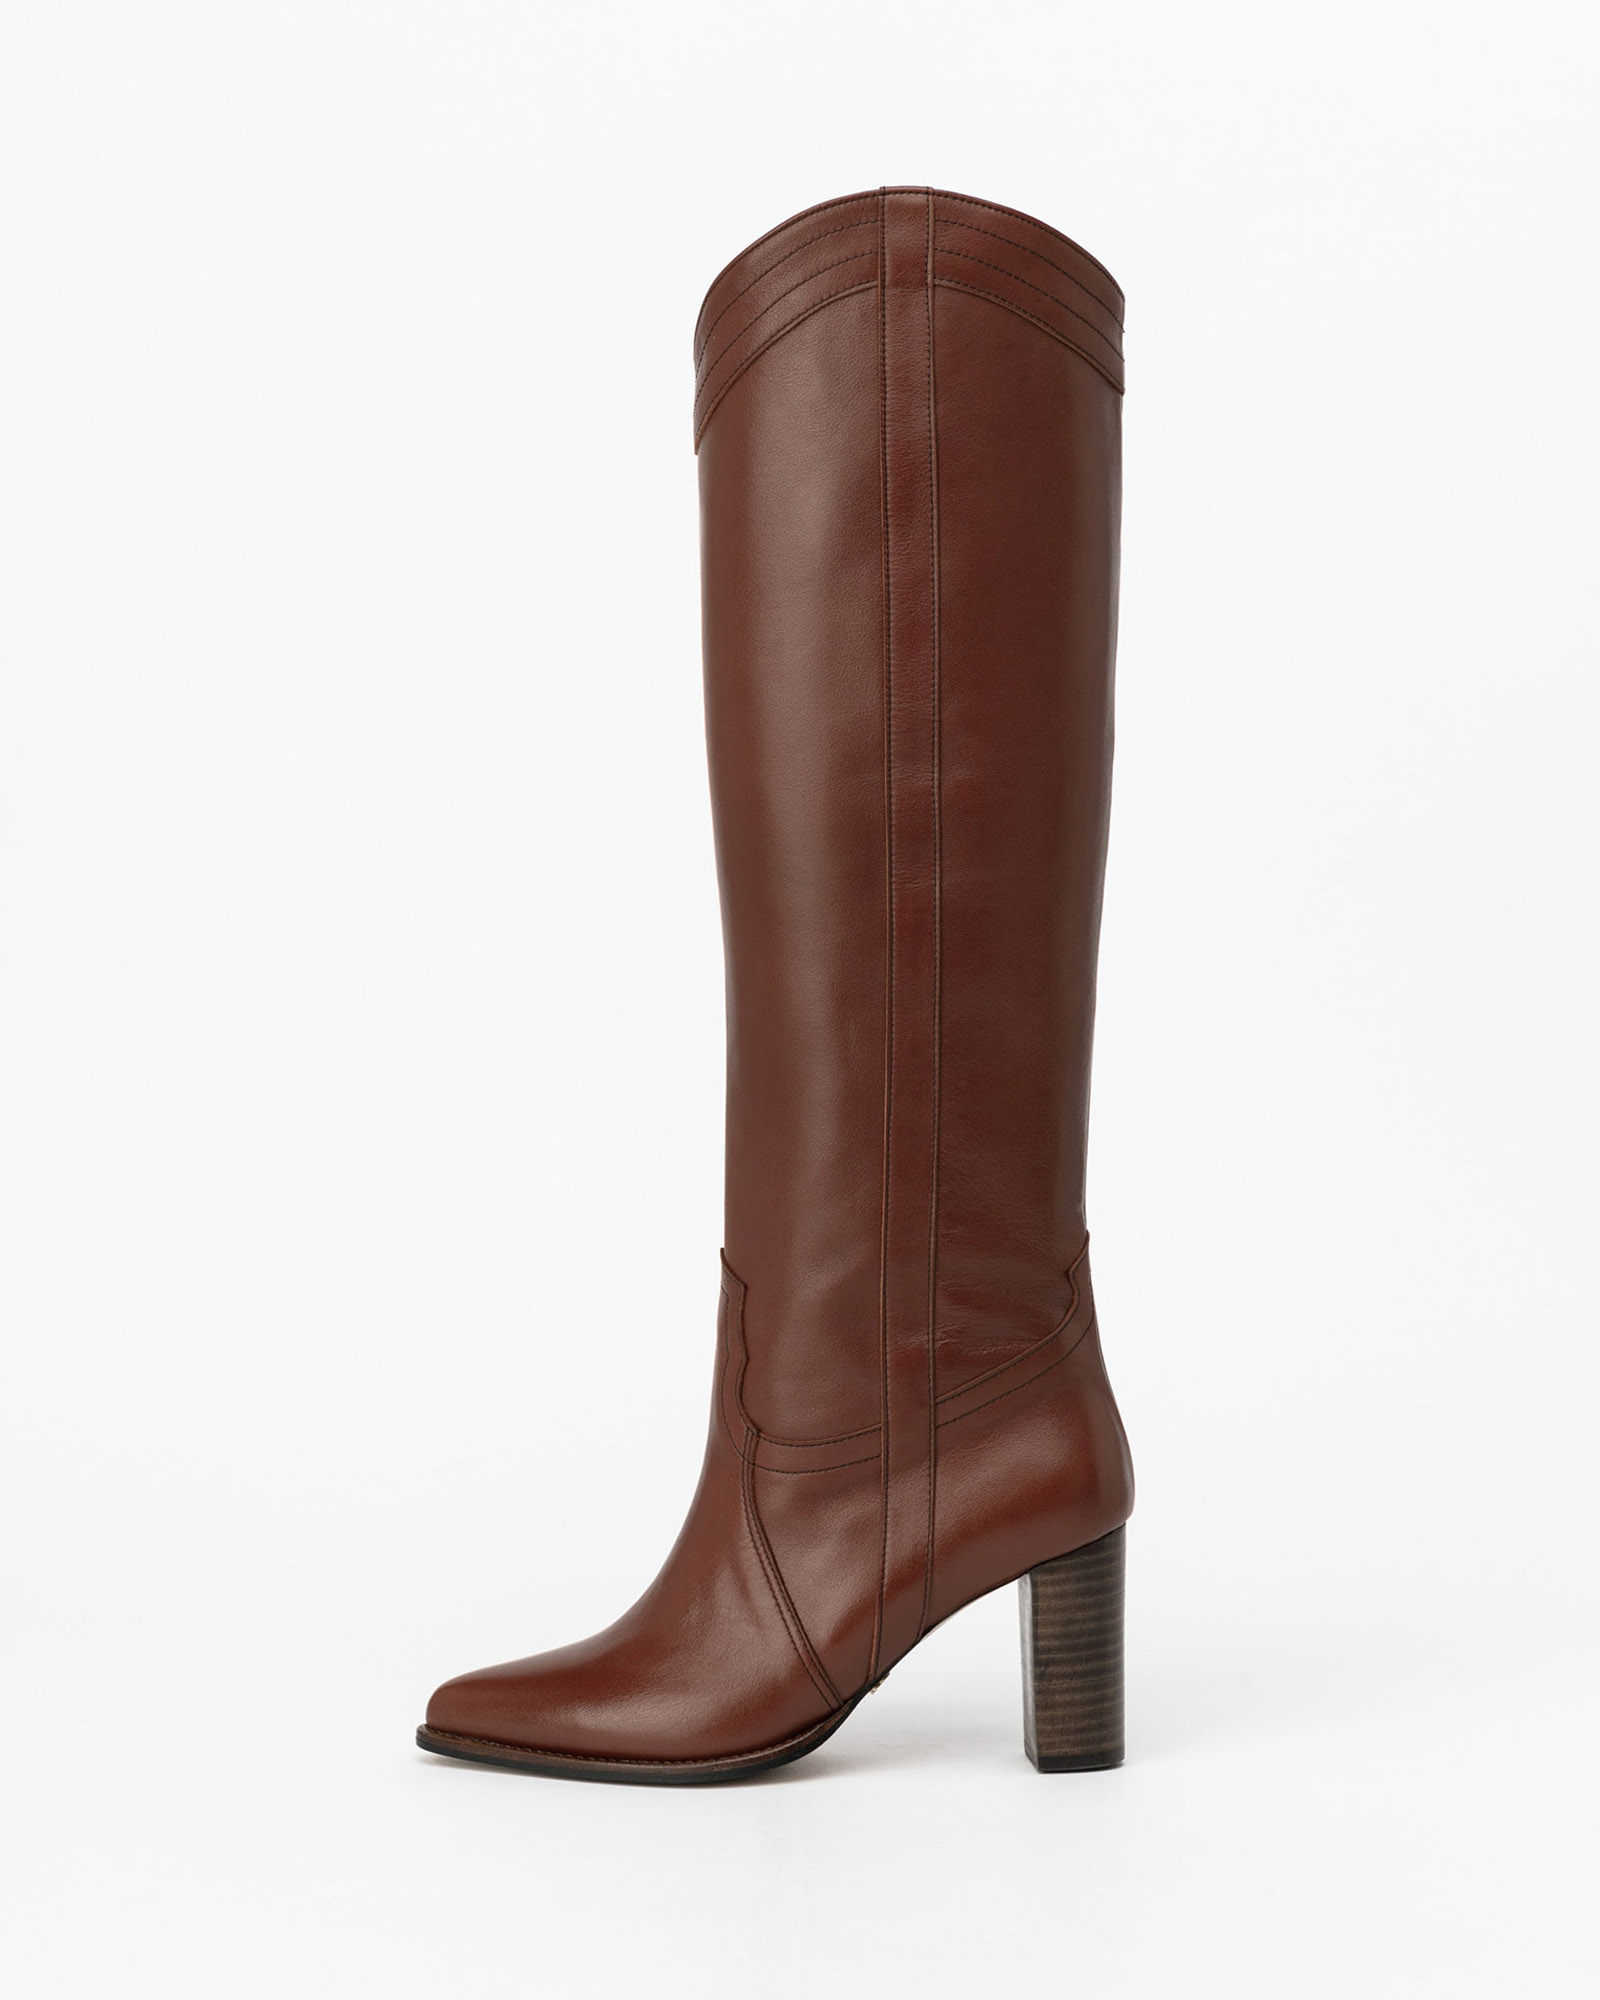 Tanae Cowboy Boots in Brown